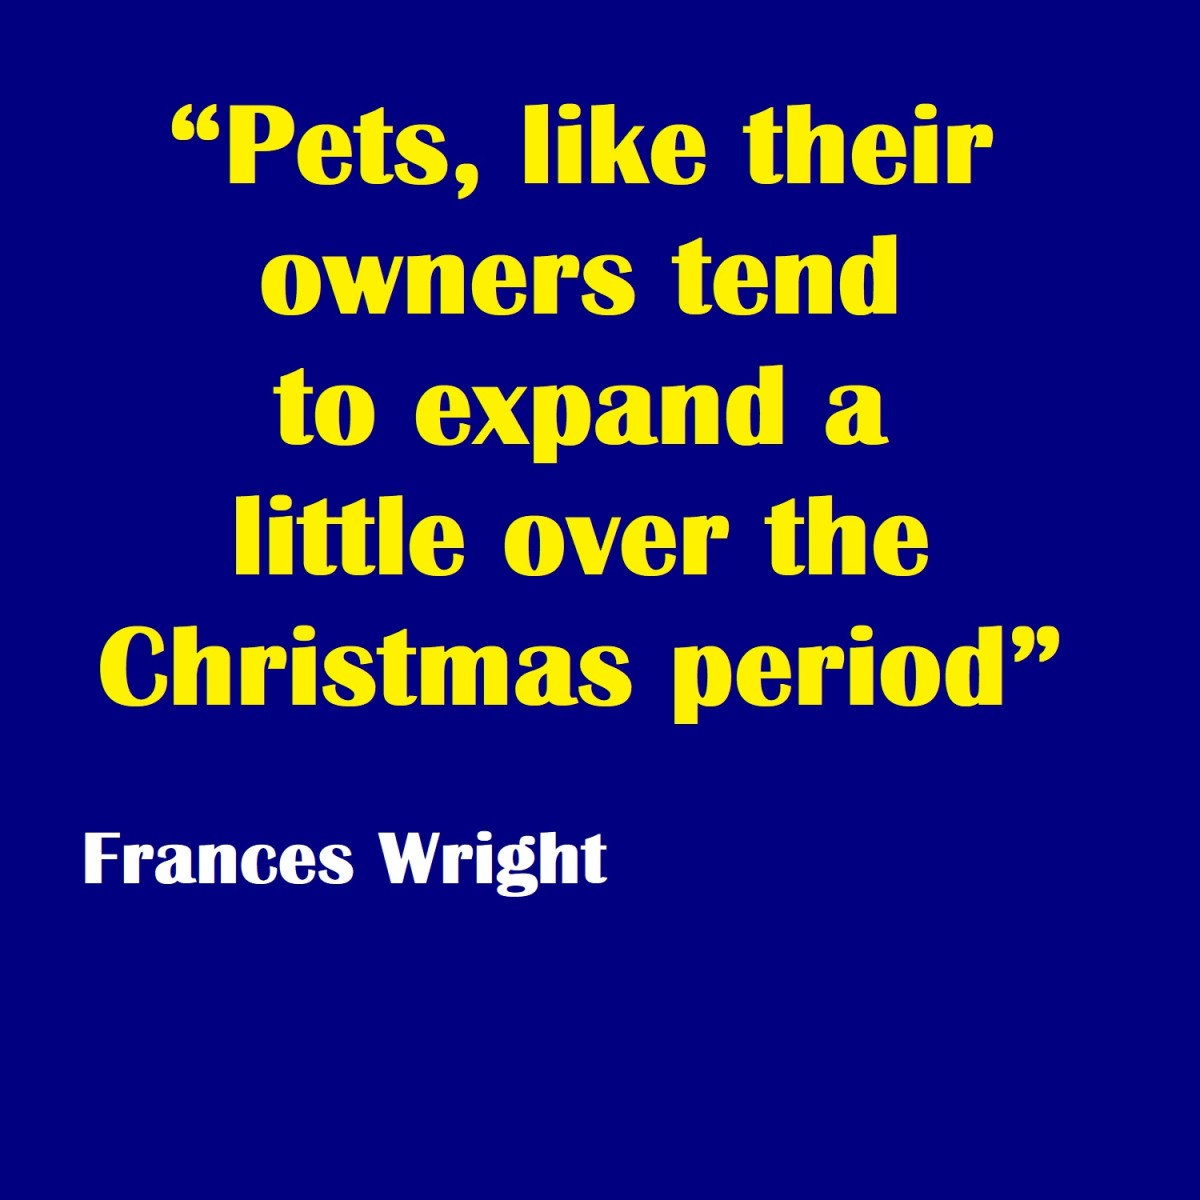 "Pets, like their owners, tend to expand a little over the Christmas period."